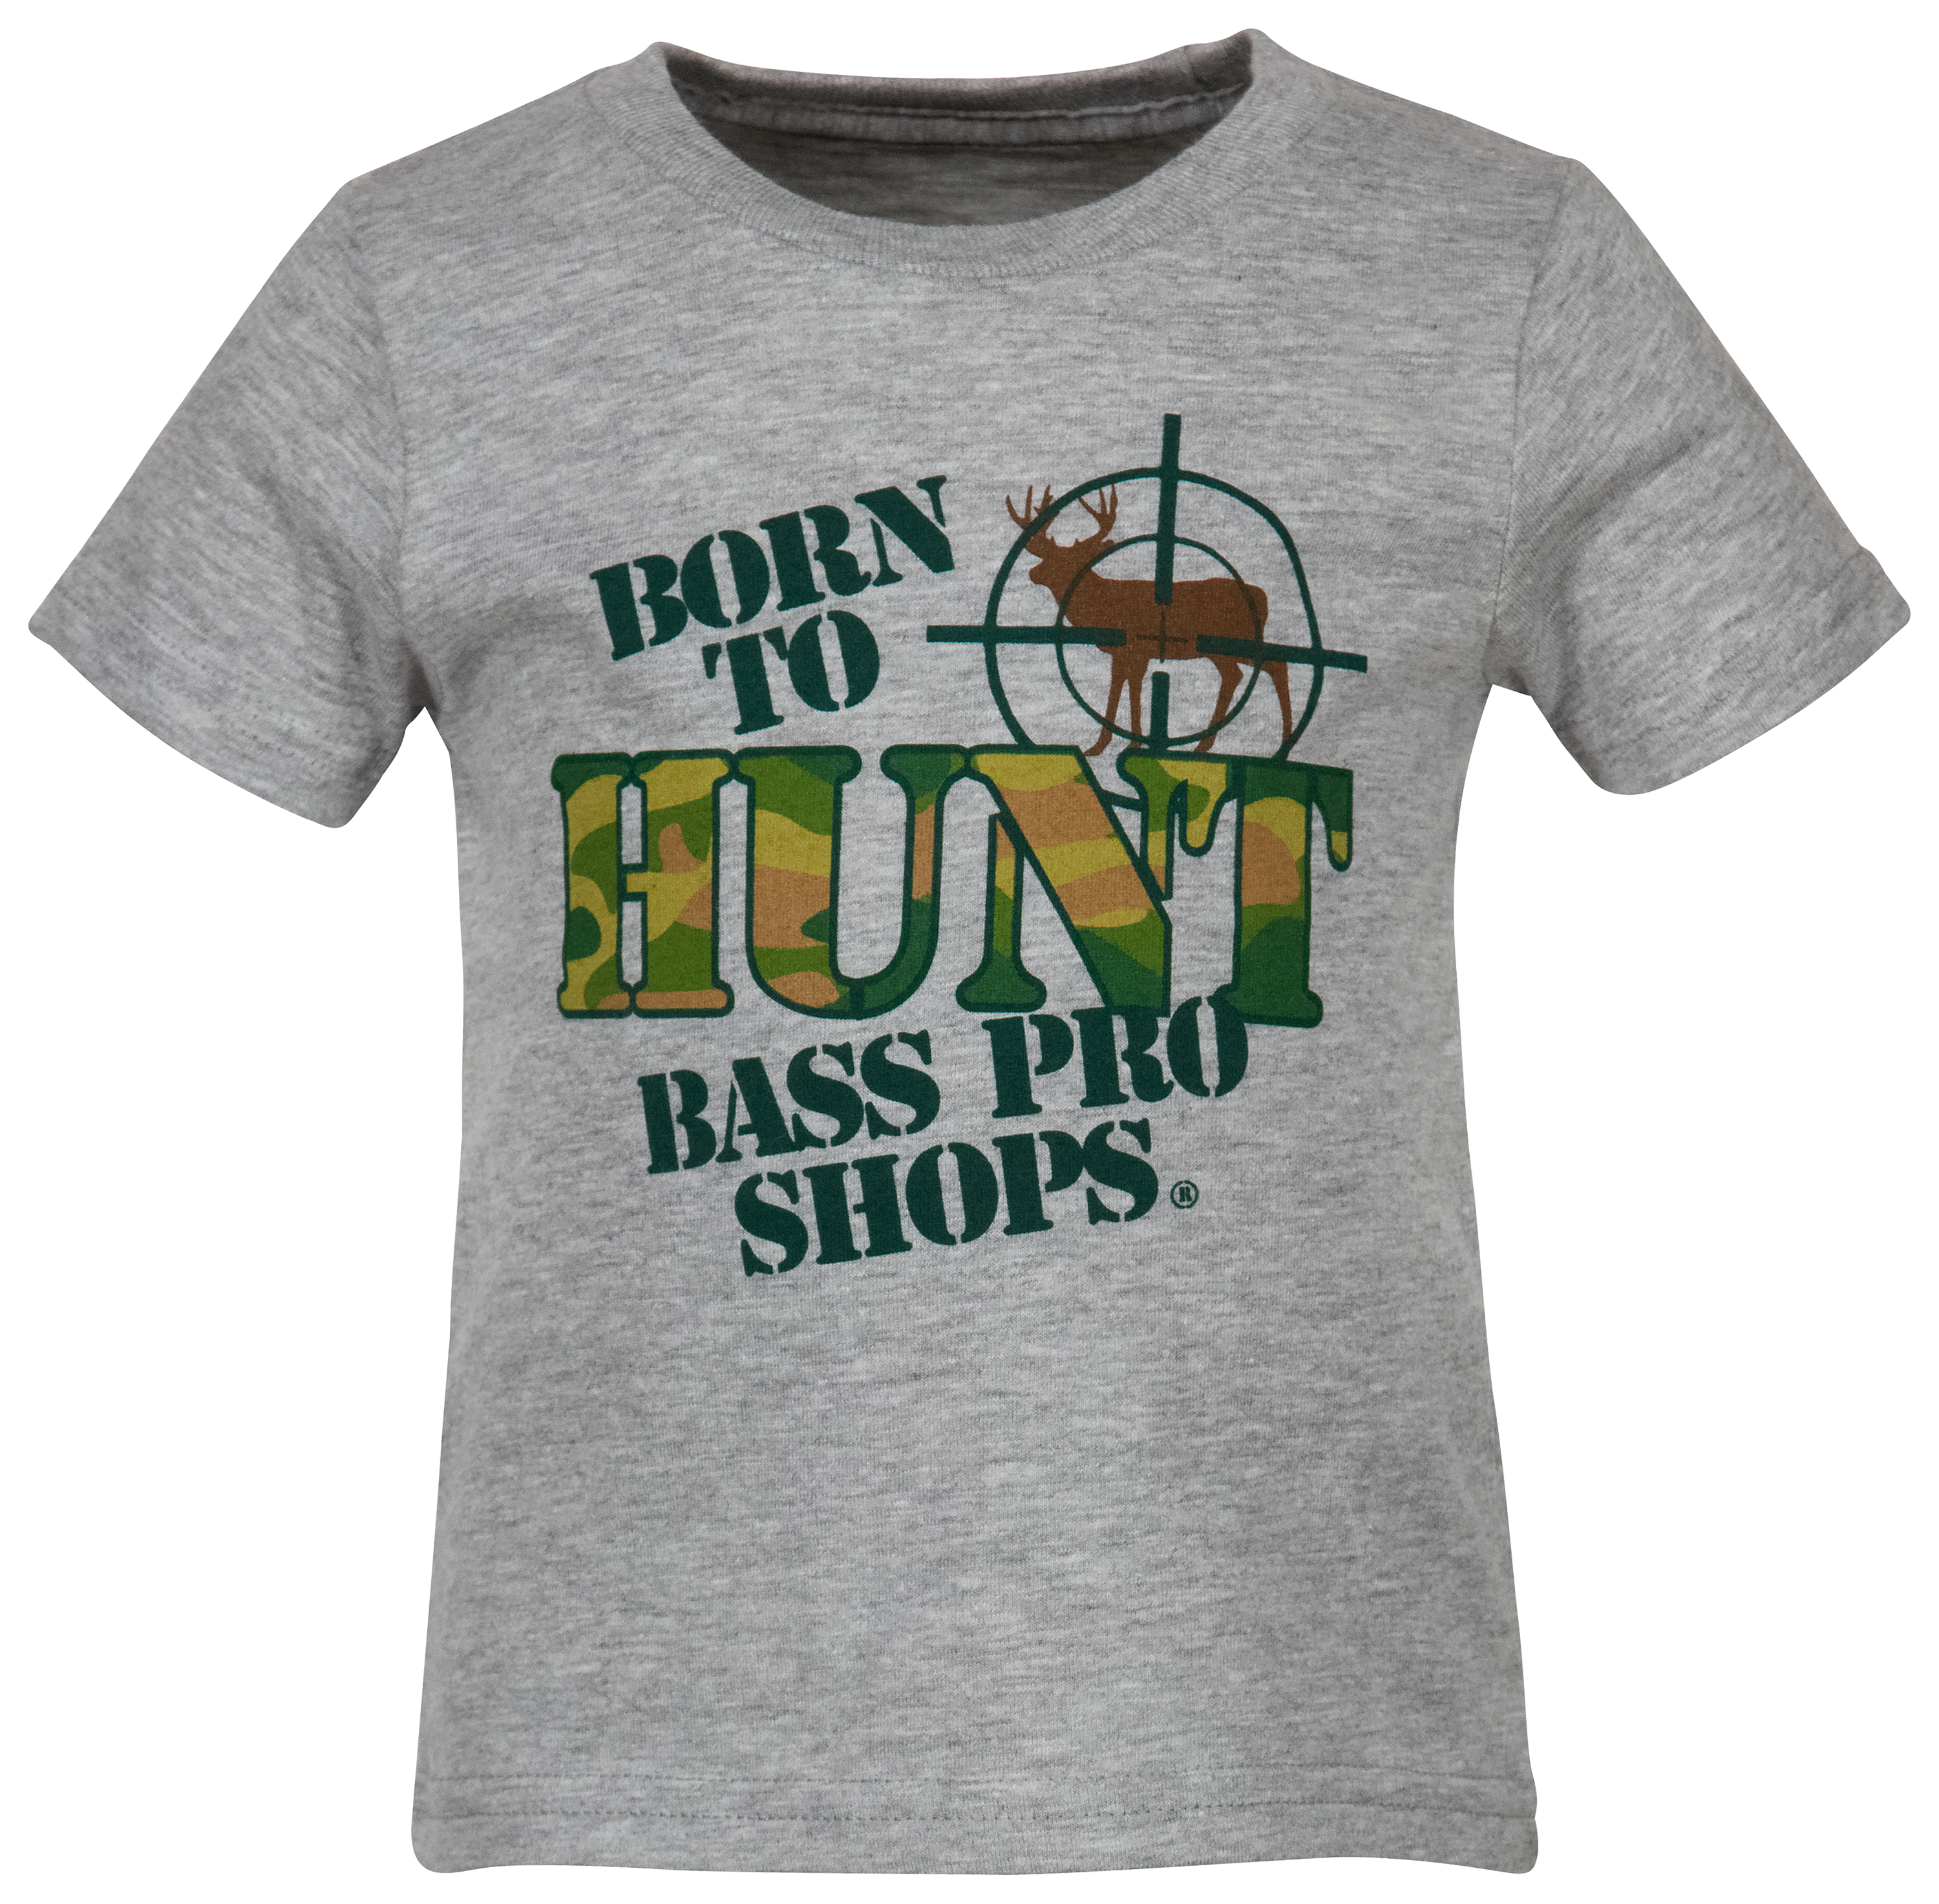 Bass Pro Shops Born to Hunt Short-Sleeve T-Shirt for Baby Boys